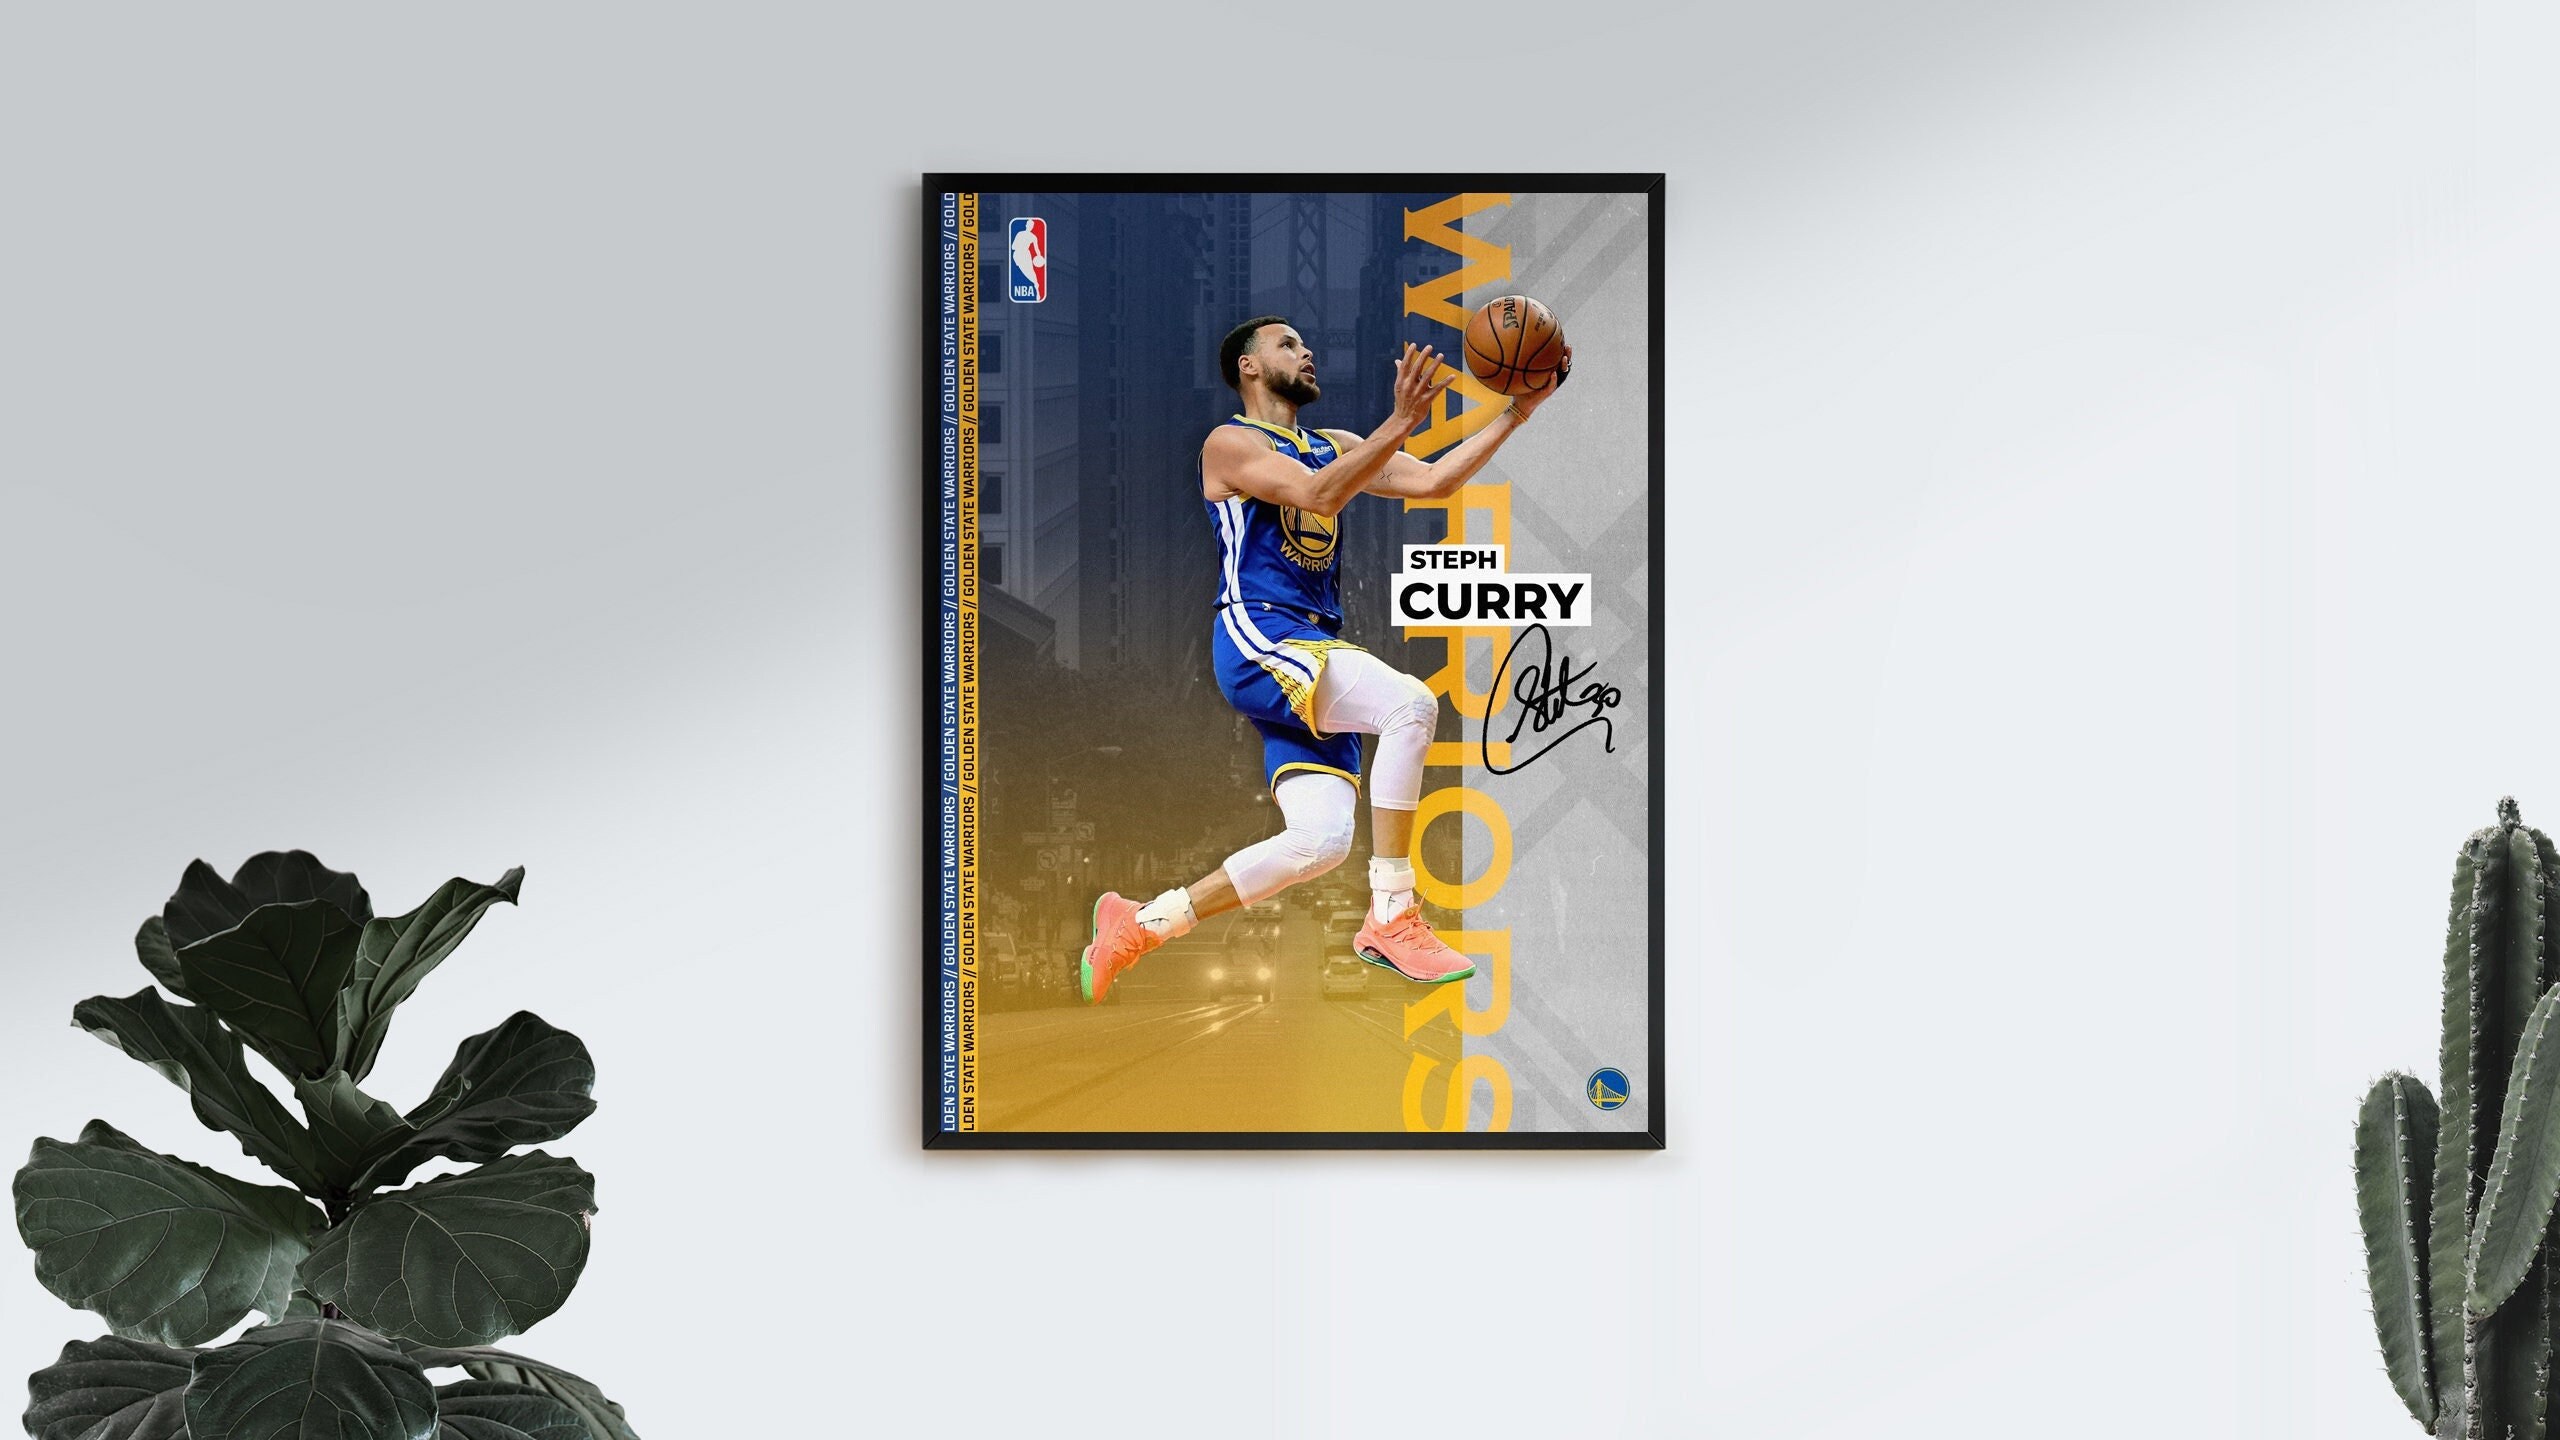 Stephen Curry  30  Chef Curry  Golden State Warriors  Sports  Gift  Print  Wall Art  Basketball  NBA  Poster  INSTANT DOWNLOAD